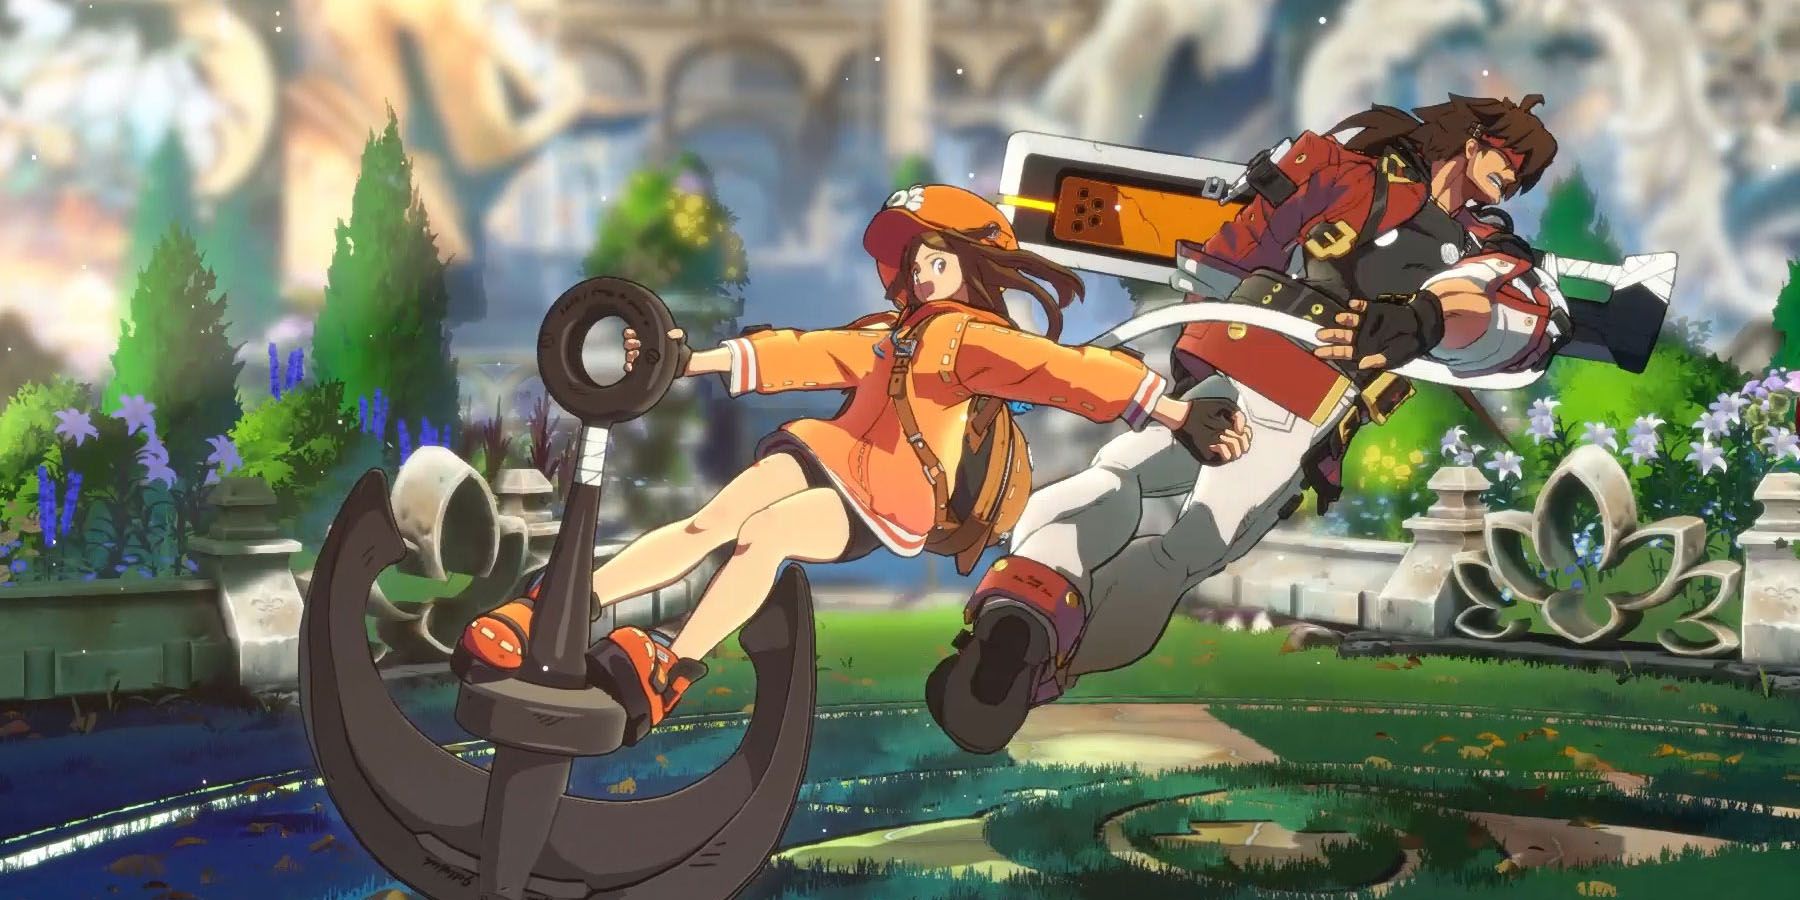 May hitting Sol Badguy in Guilty Gear Strive